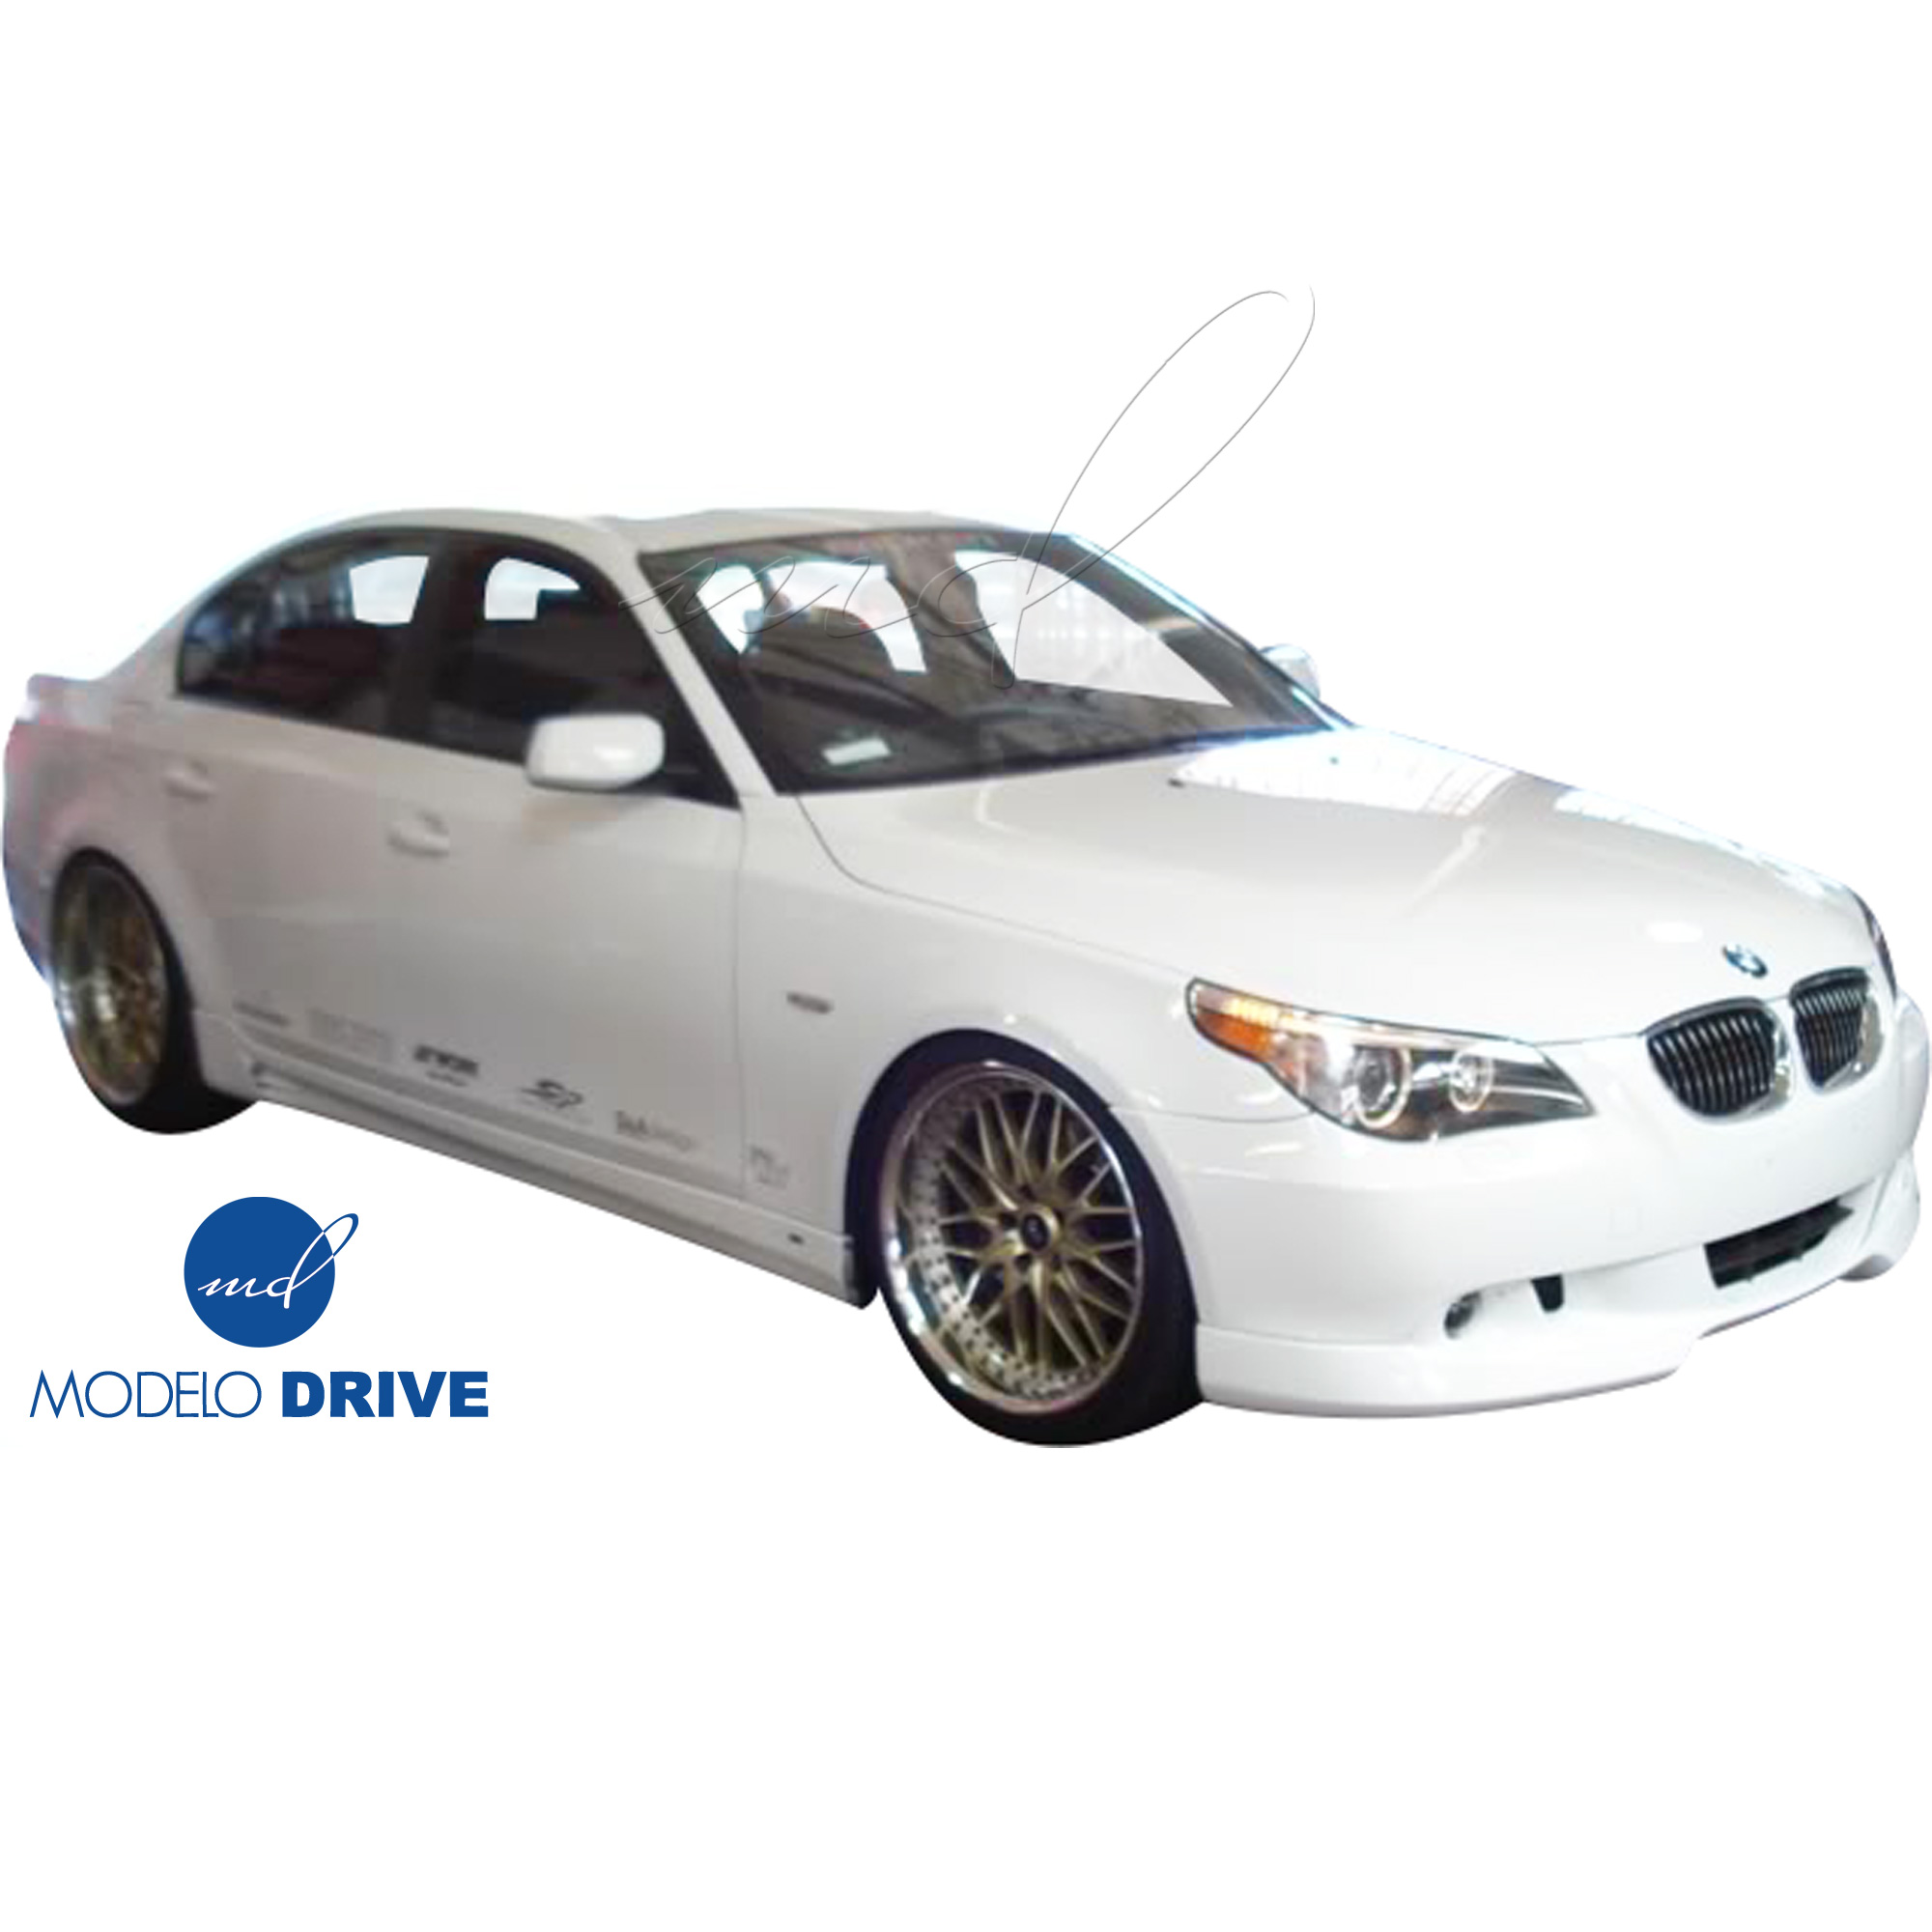 ModeloDrive FRP ASCH Front Valance Add-on > BMW 5-Series E60 2004-2010 > 4dr - Image 1